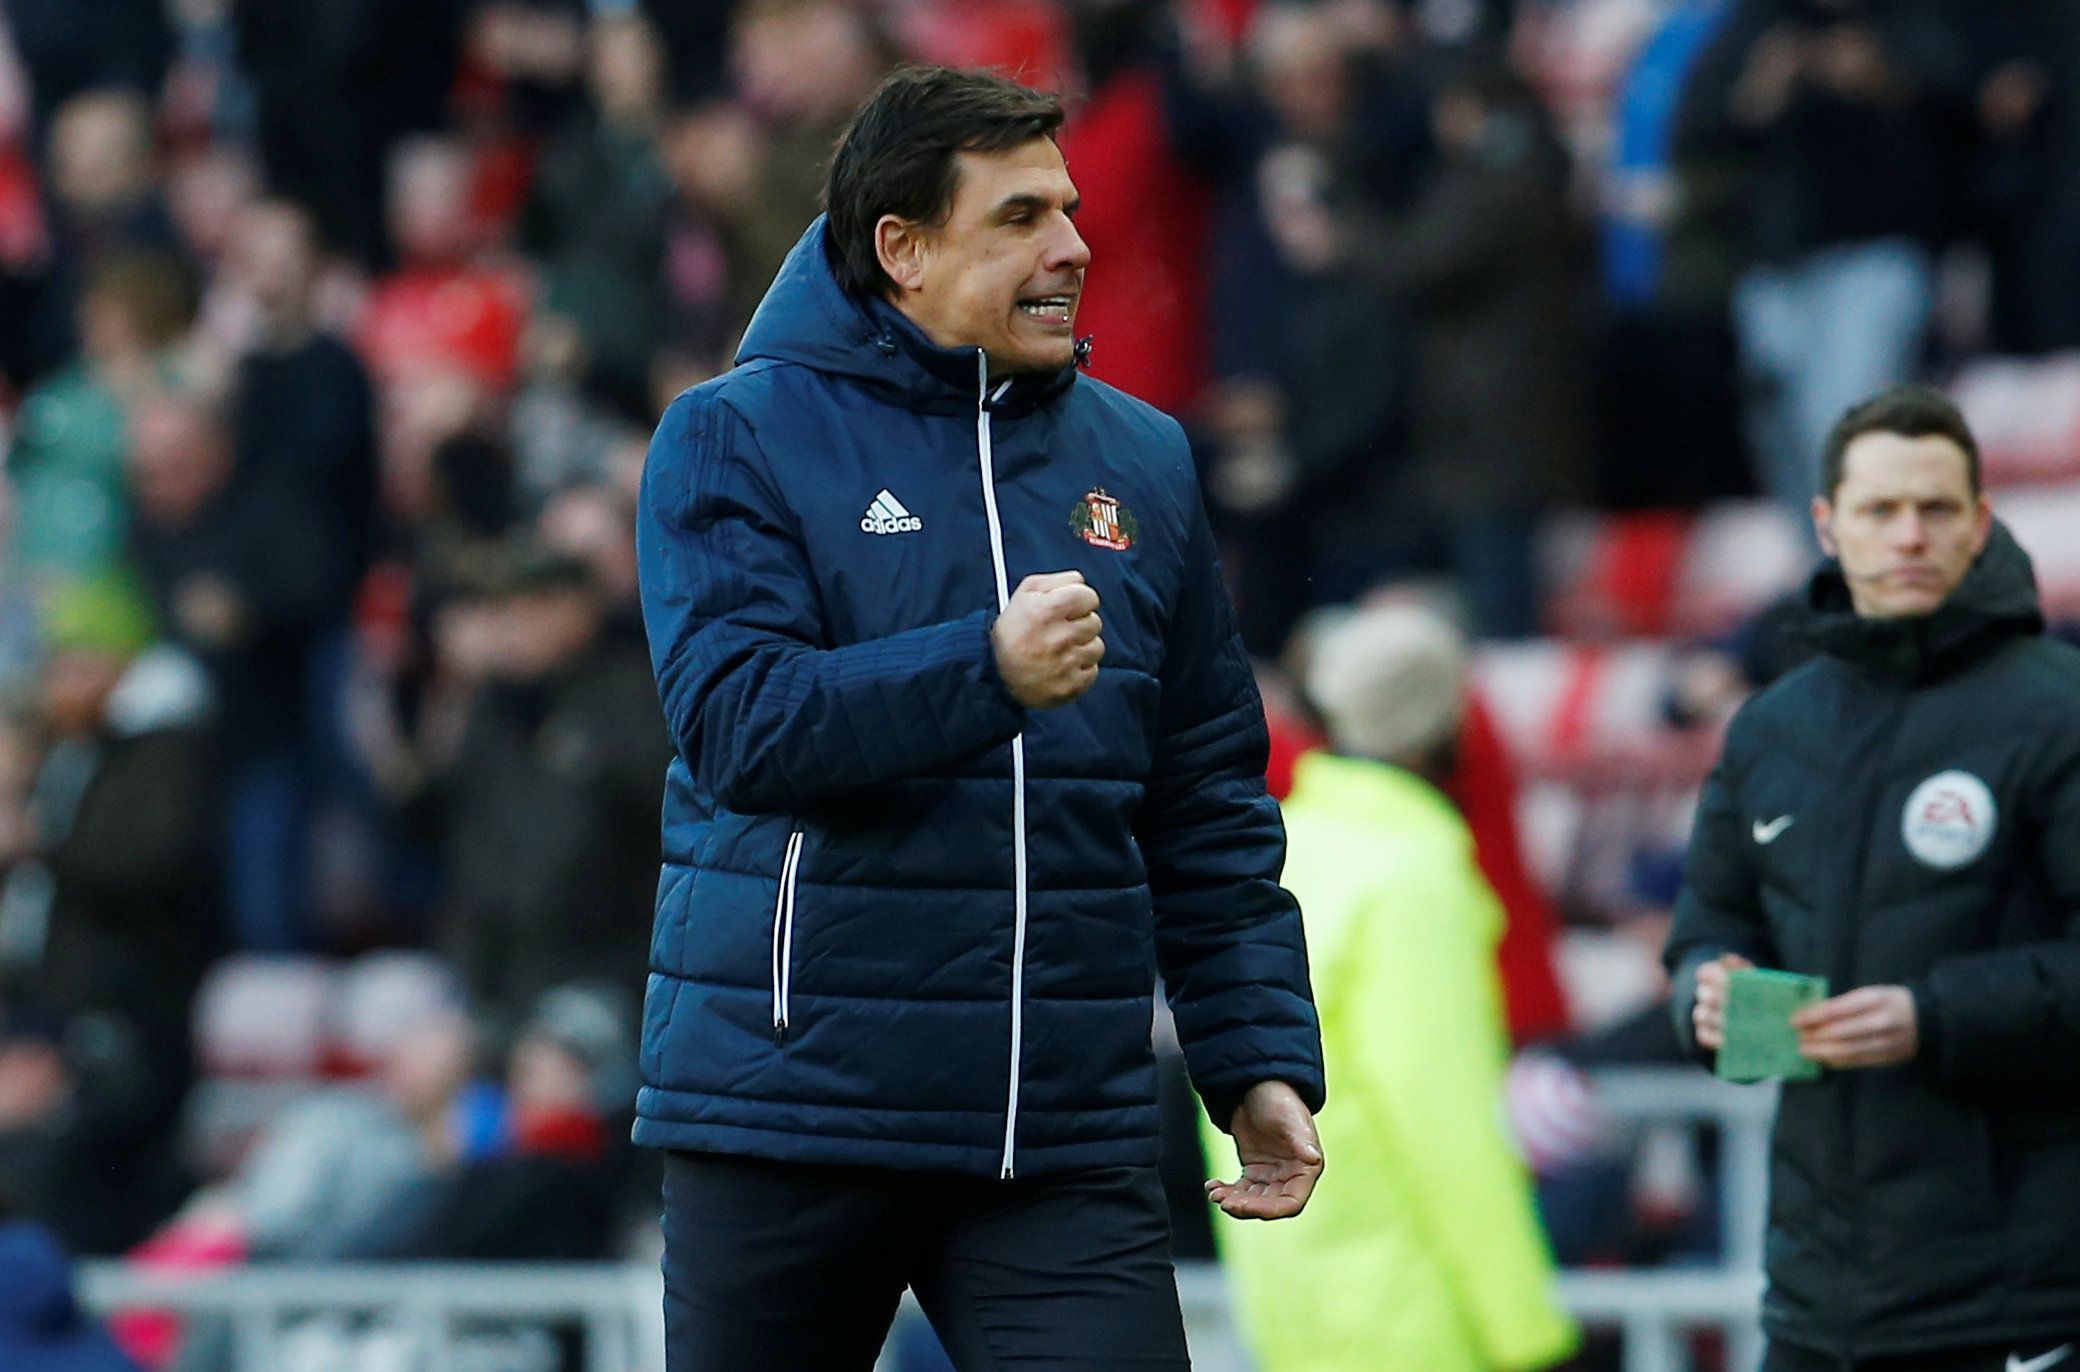 Soccer Football - Championship - Sunderland vs Middlesbrough - Stadium of Light, Sunderland, Britain - February 24, 2018  Sunderland manager Chris Coleman celebrates after his side's first goal scored by Joel Asoro (not pictured)   Action Images/Craig Brough  EDITORIAL USE ONLY. No use with unauthorized audio, video, data, fixture lists, club/league logos or 